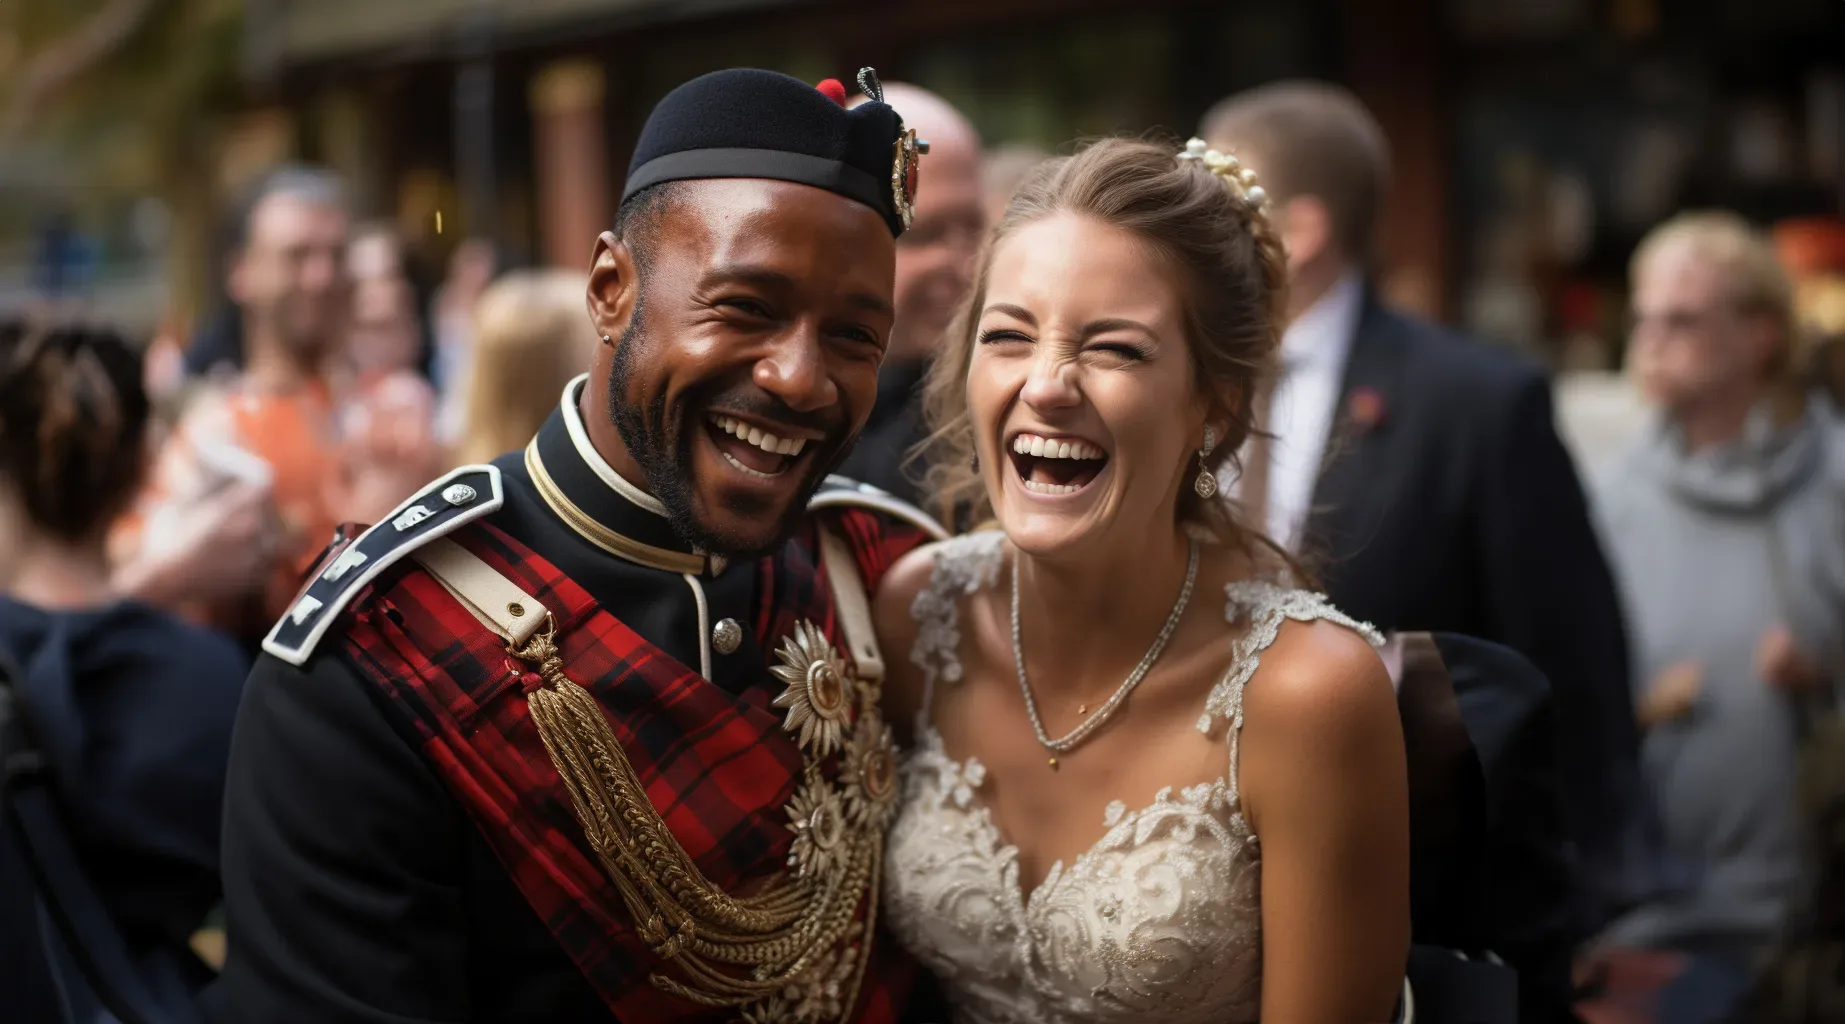 A bride and groom dressed in kilts are laughing together. documentary Wedding Photographer